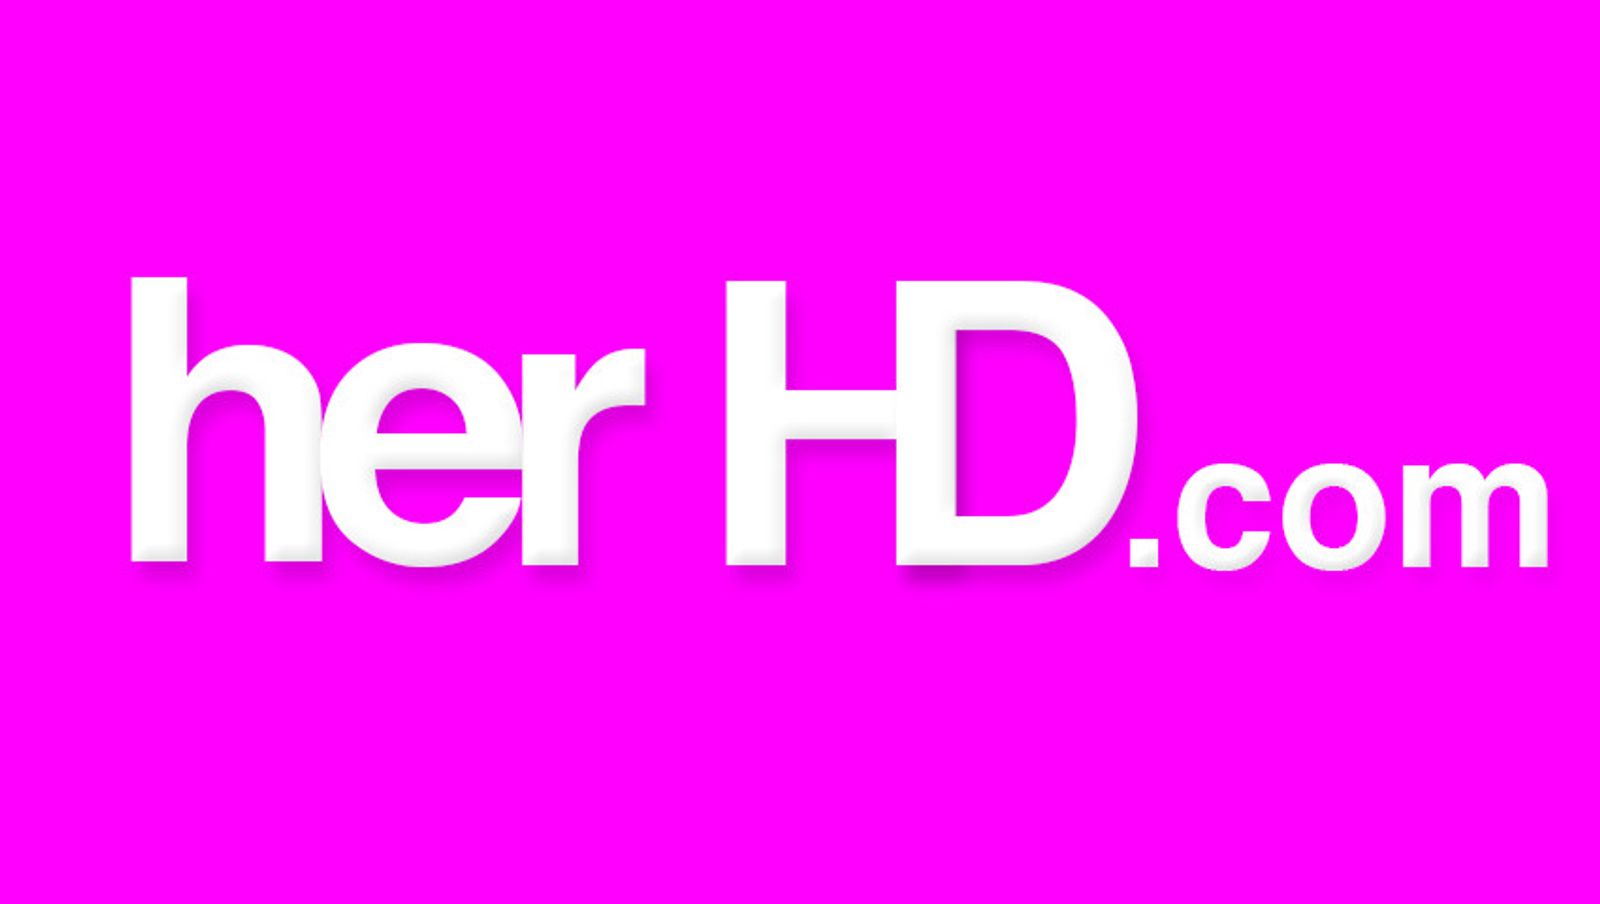 HerHD.com Launches 'Story-Driven' 4K Site